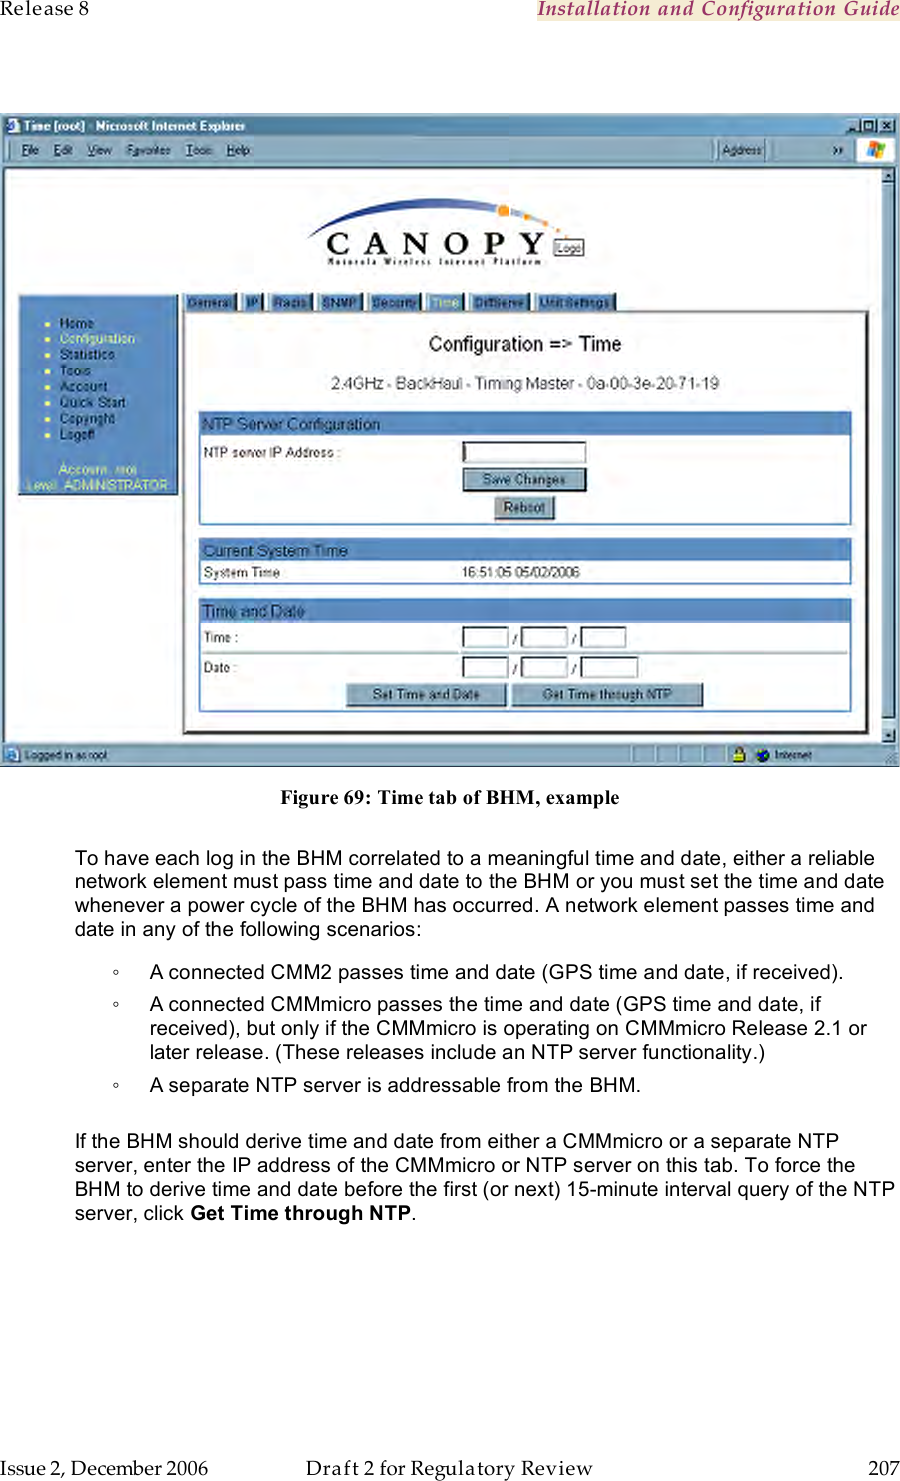 Release 8    Installation and Configuration Guide   Issue 2, December 2006  Draft 2 for Regulatory Review  207       Figure 69: Time tab of BHM, example  To have each log in the BHM correlated to a meaningful time and date, either a reliable network element must pass time and date to the BHM or you must set the time and date whenever a power cycle of the BHM has occurred. A network element passes time and date in any of the following scenarios: ◦  A connected CMM2 passes time and date (GPS time and date, if received).  ◦  A connected CMMmicro passes the time and date (GPS time and date, if received), but only if the CMMmicro is operating on CMMmicro Release 2.1 or later release. (These releases include an NTP server functionality.) ◦  A separate NTP server is addressable from the BHM.  If the BHM should derive time and date from either a CMMmicro or a separate NTP server, enter the IP address of the CMMmicro or NTP server on this tab. To force the BHM to derive time and date before the first (or next) 15-minute interval query of the NTP server, click Get Time through NTP. 